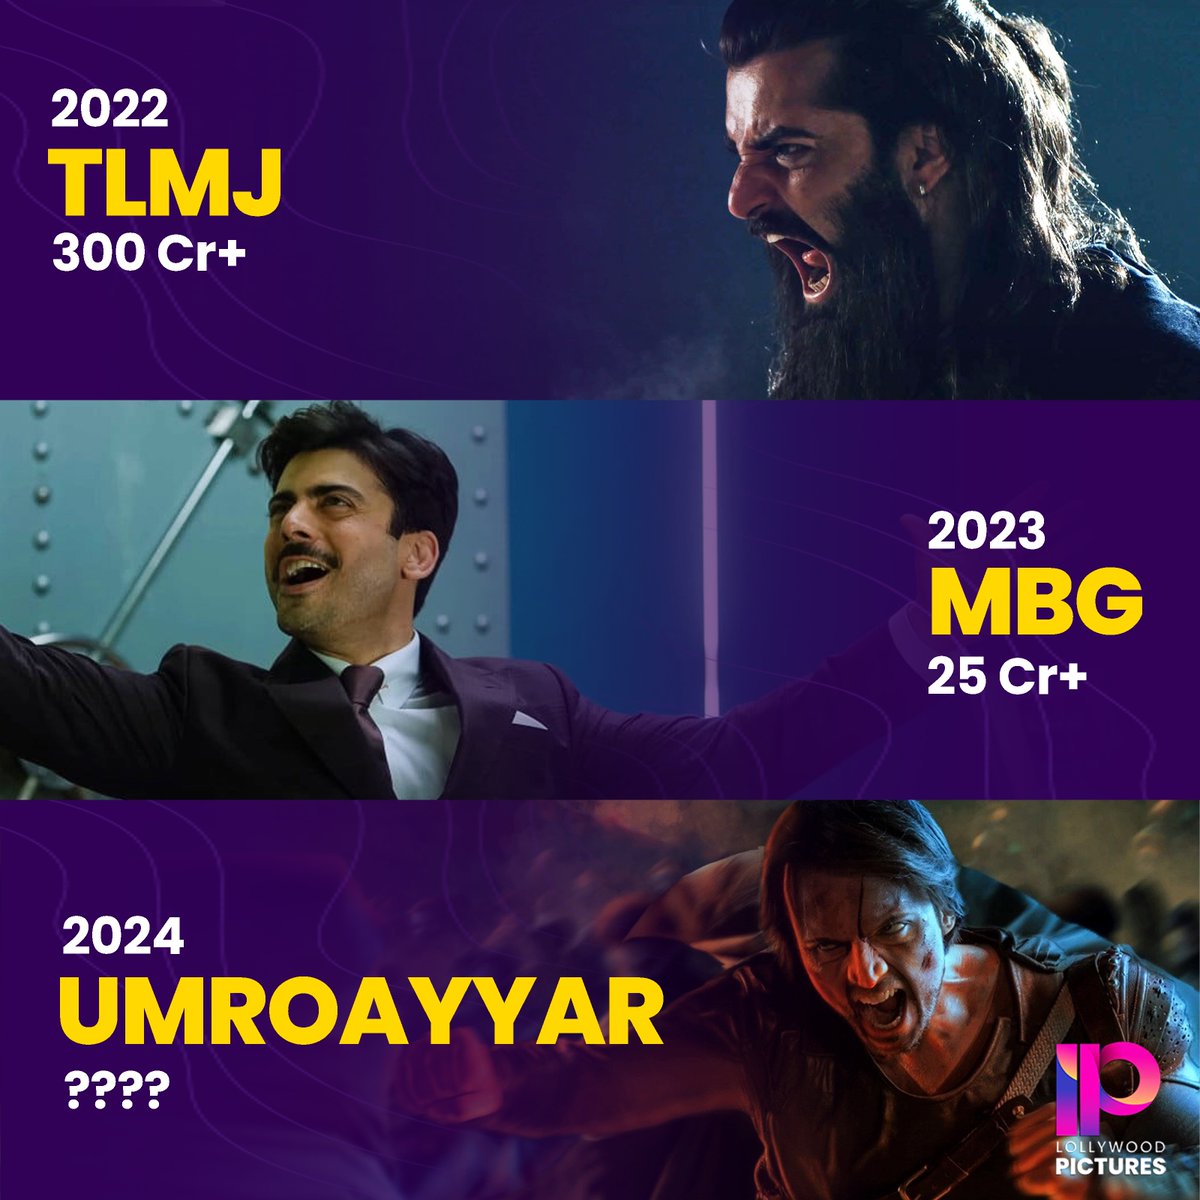 As of 2022 and 2023, The Legend of Maula Jatt and Money Back Guarantee had the highest box office gross. 
Do you think UmroAyyar can become the top film of 2024 taking into account the potential possibilities?🔥🙌🏻

#UmroAyyarANewBeginning #TheLegendofMaulaJatt